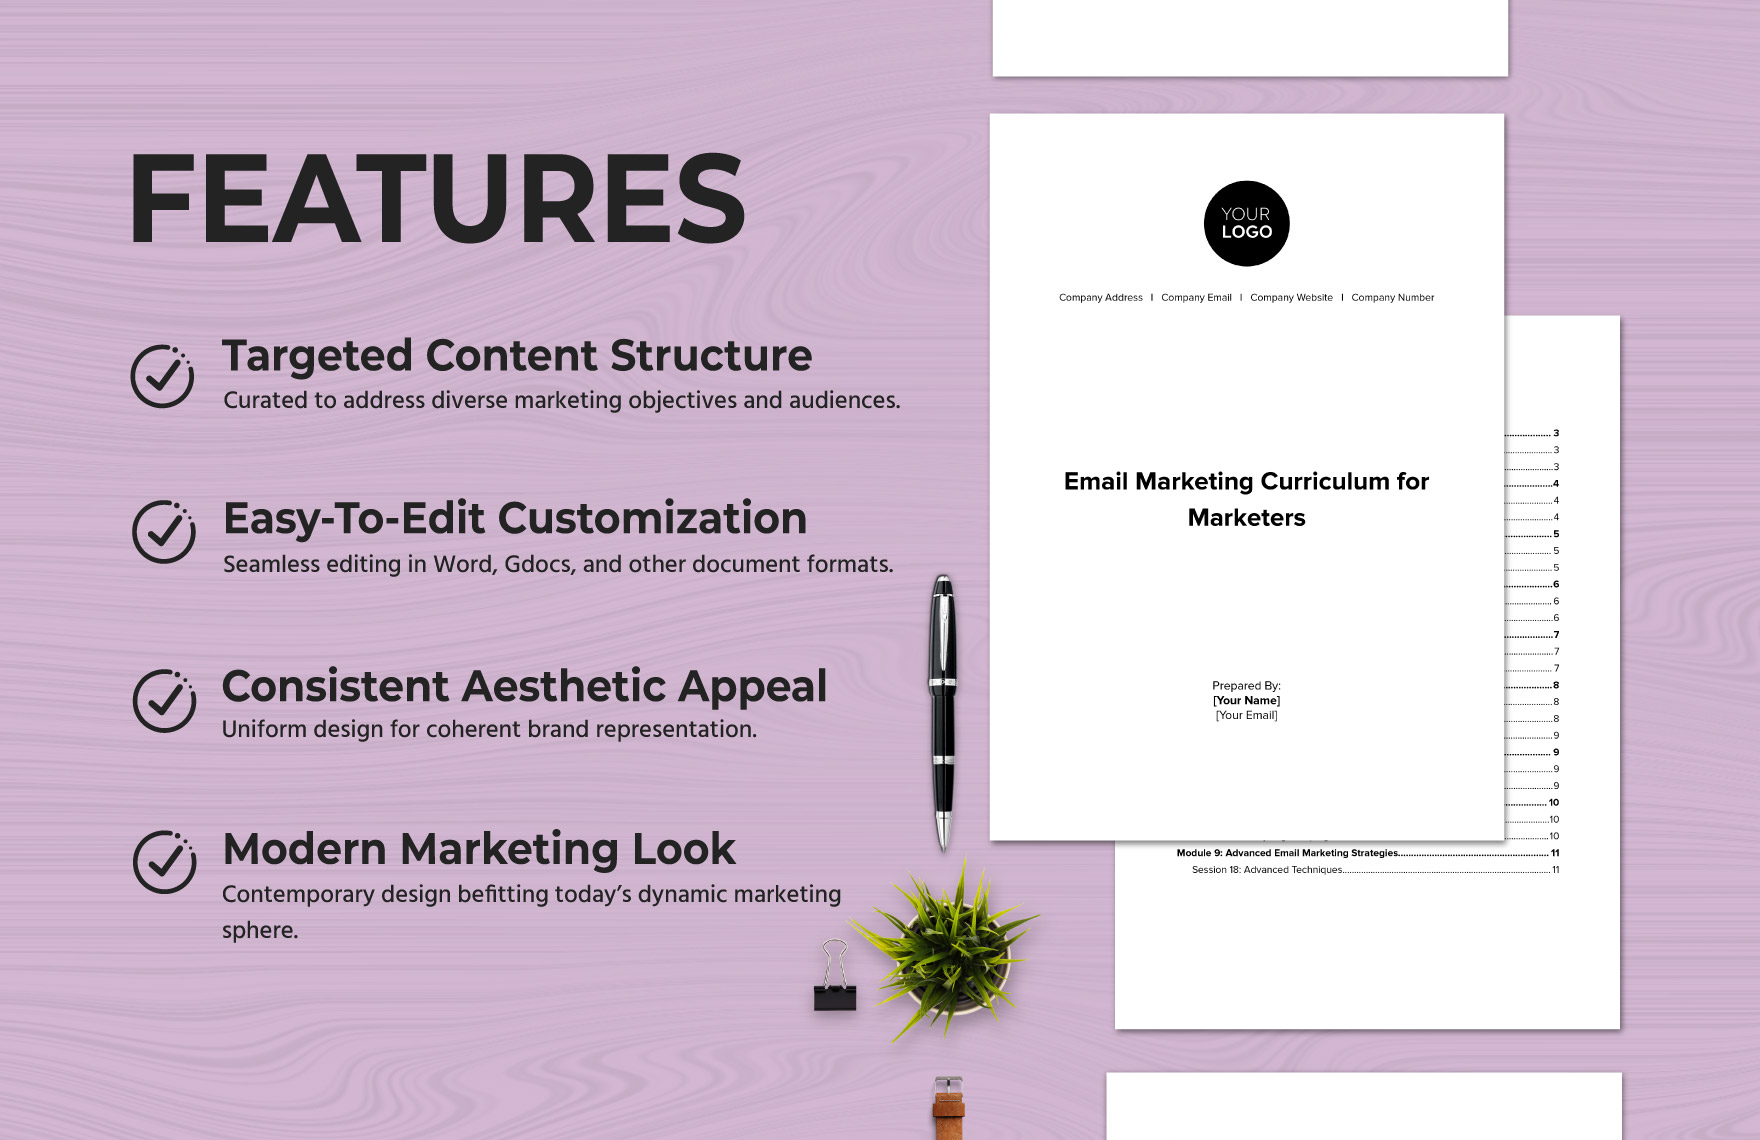 Email Marketing Curriculum for Marketers Template